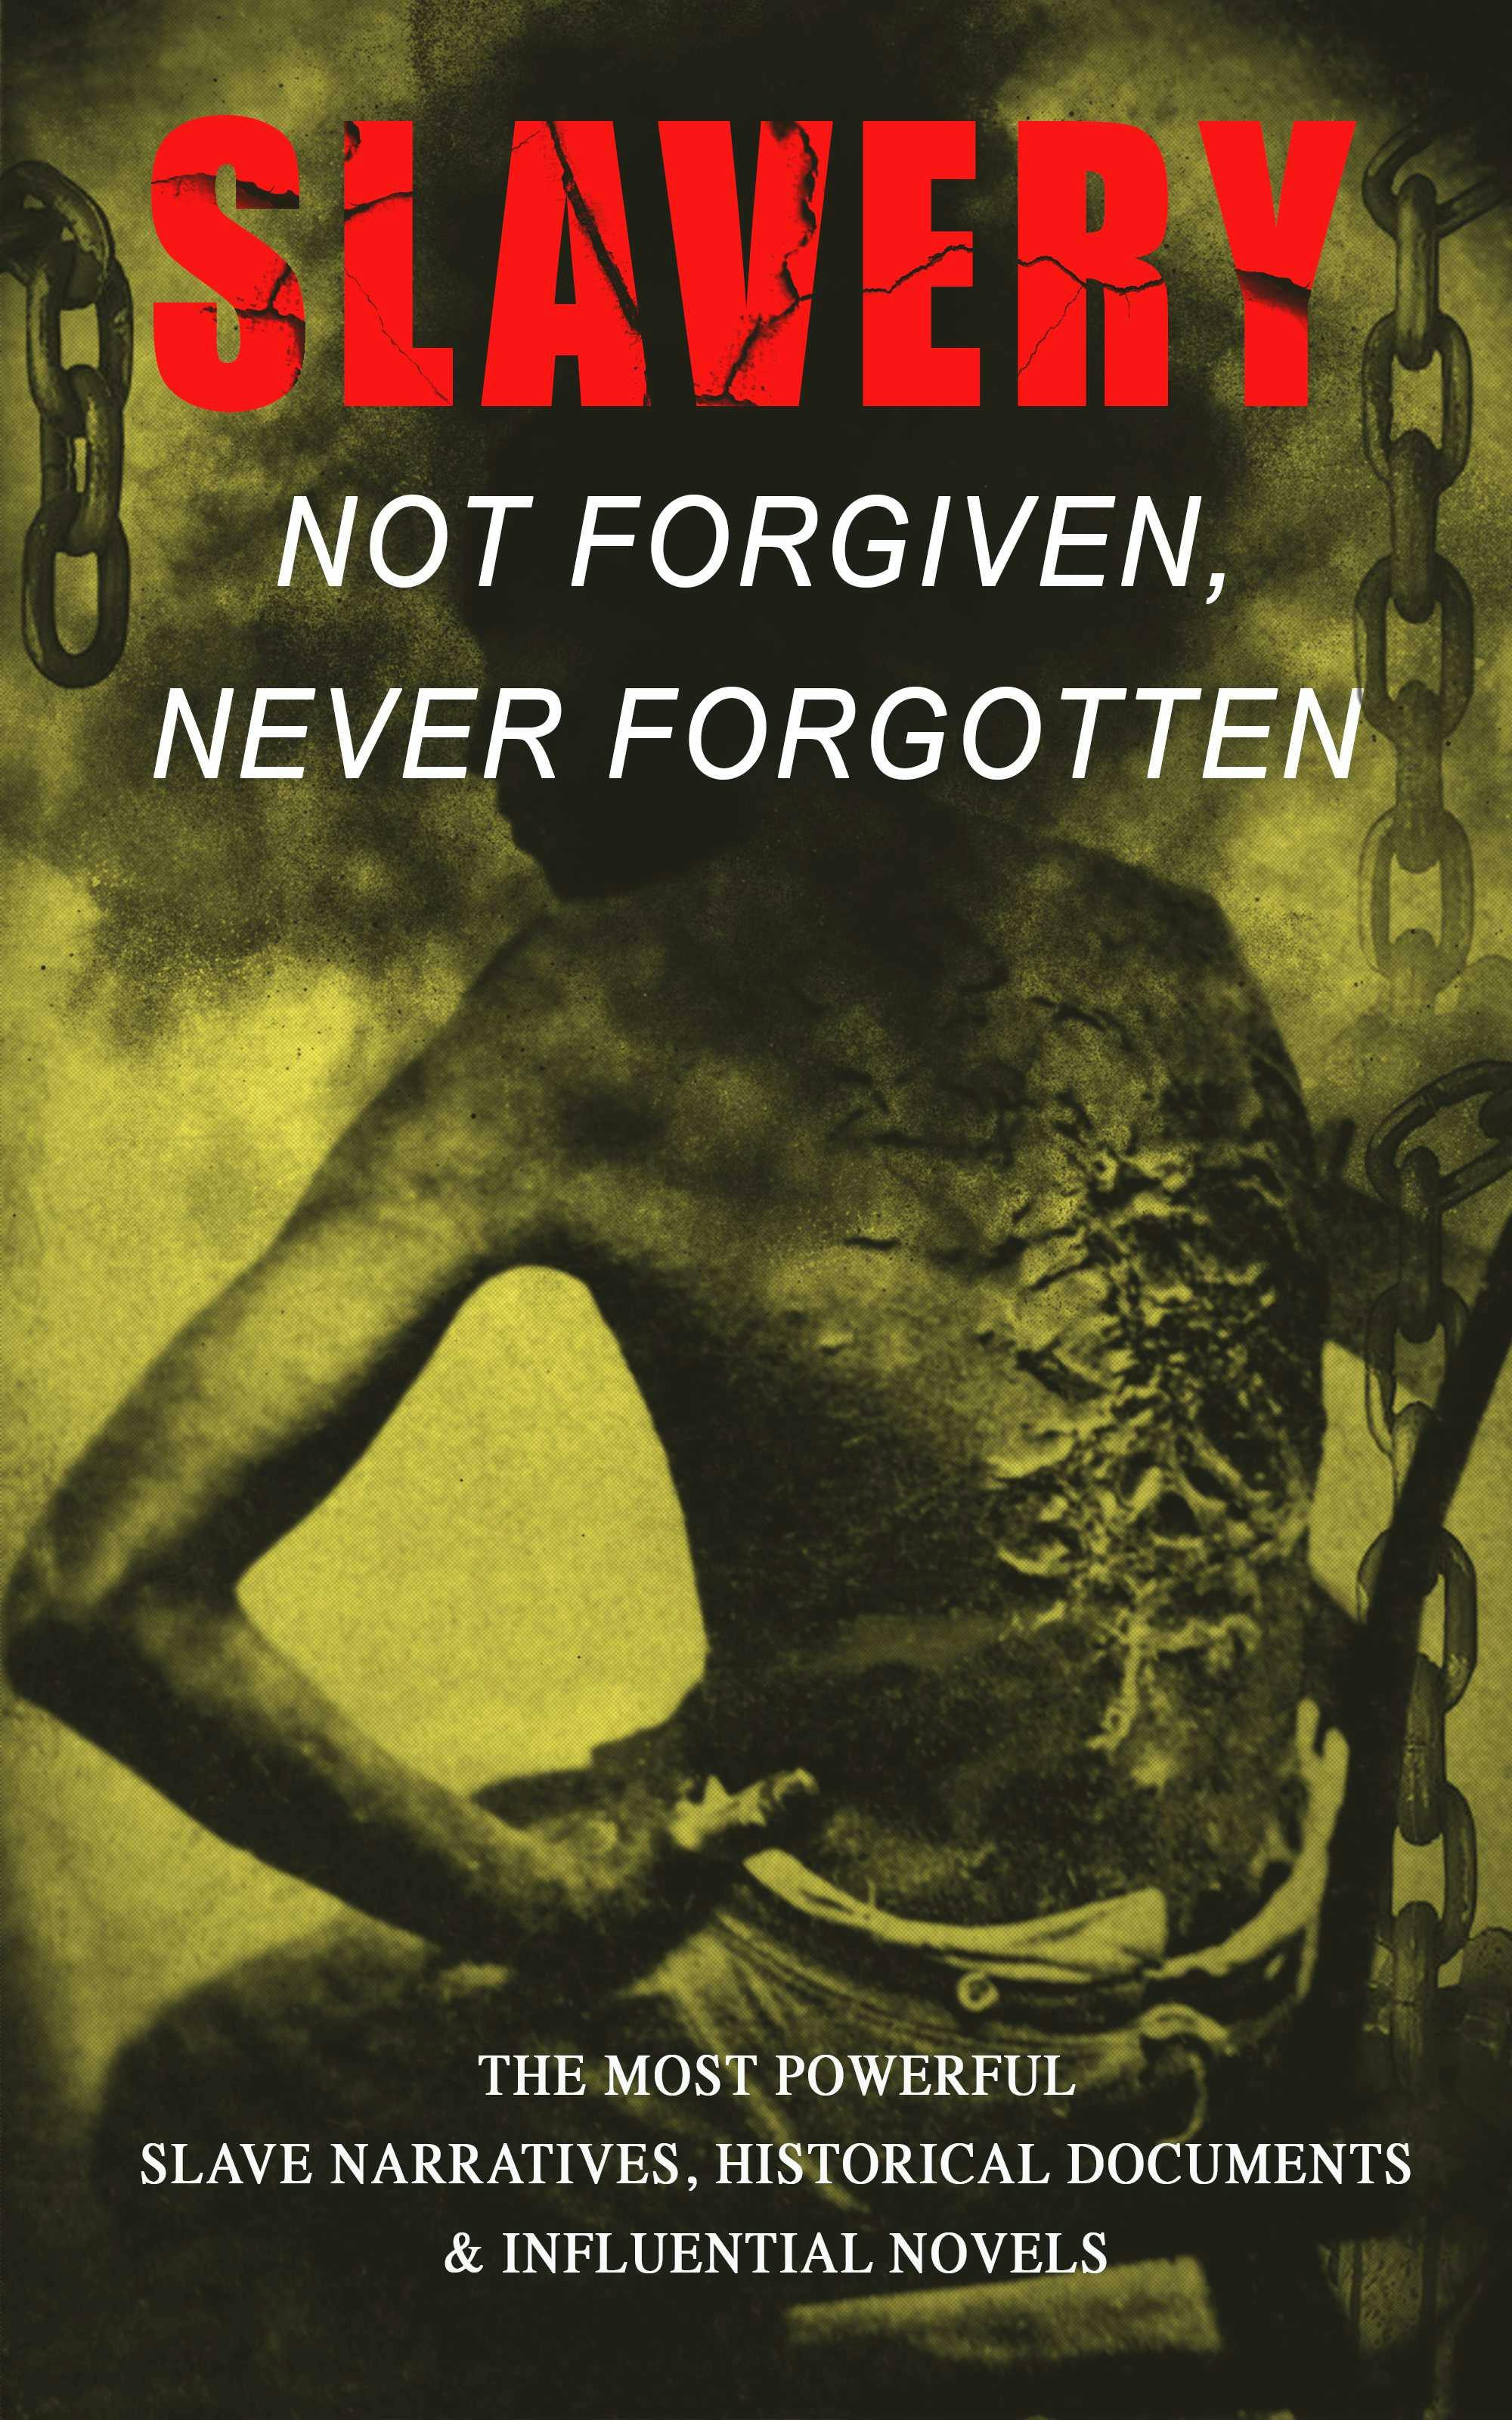 Slavery: Not Forgiven, Never Forgotten – The Most Powerful Slave Narratives, Historical Documents & Influential Novels: The Underground Railroad, Memoirs of Frederick Douglass, 12 Years a Slave, Uncle Tom's Cabin, History of Abolitionism, Lynch Law, Civil Rights Acts, New Amendments and much more - undefined